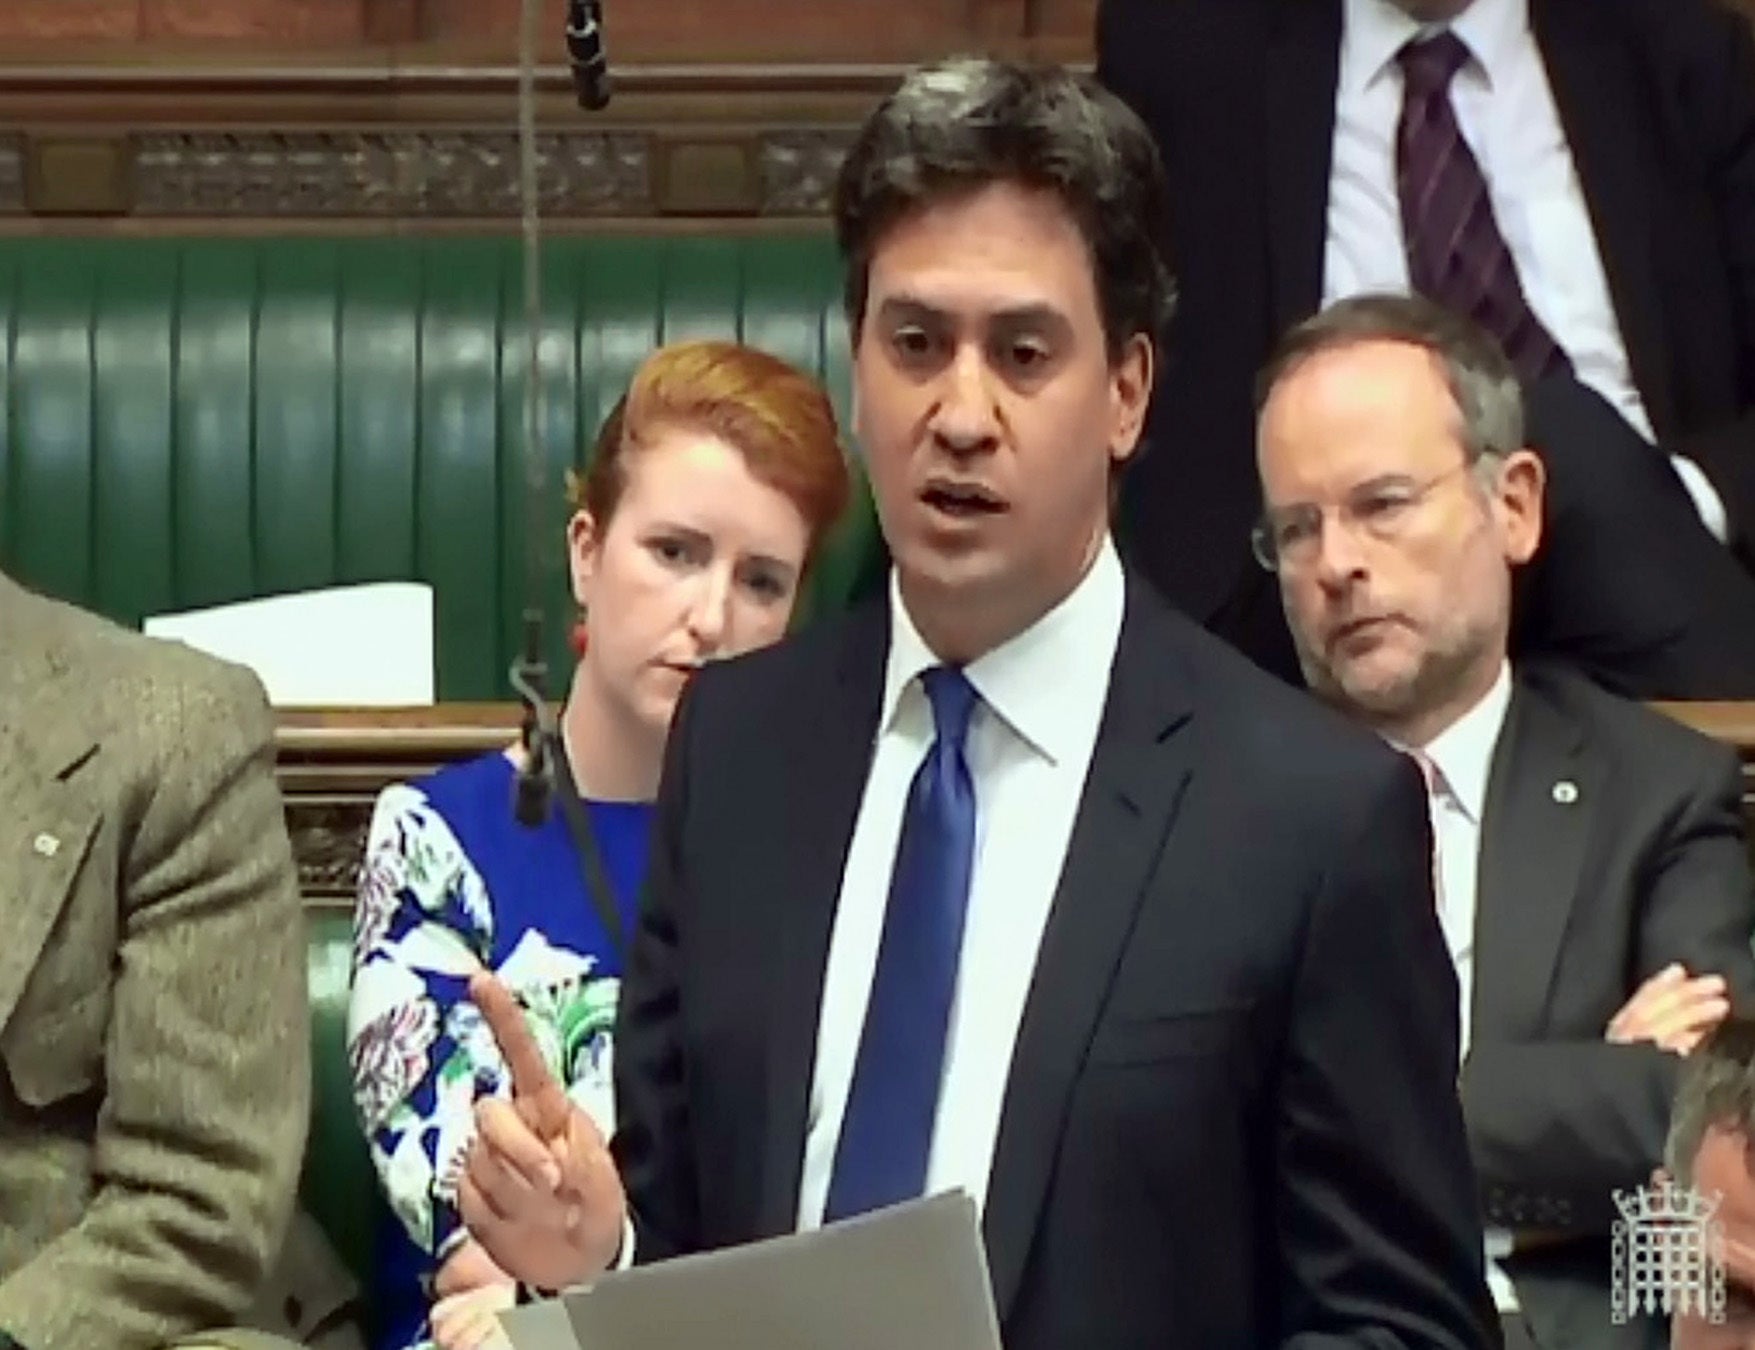 Ed Miliband makes his first speech in the House of Commons since he lost the election